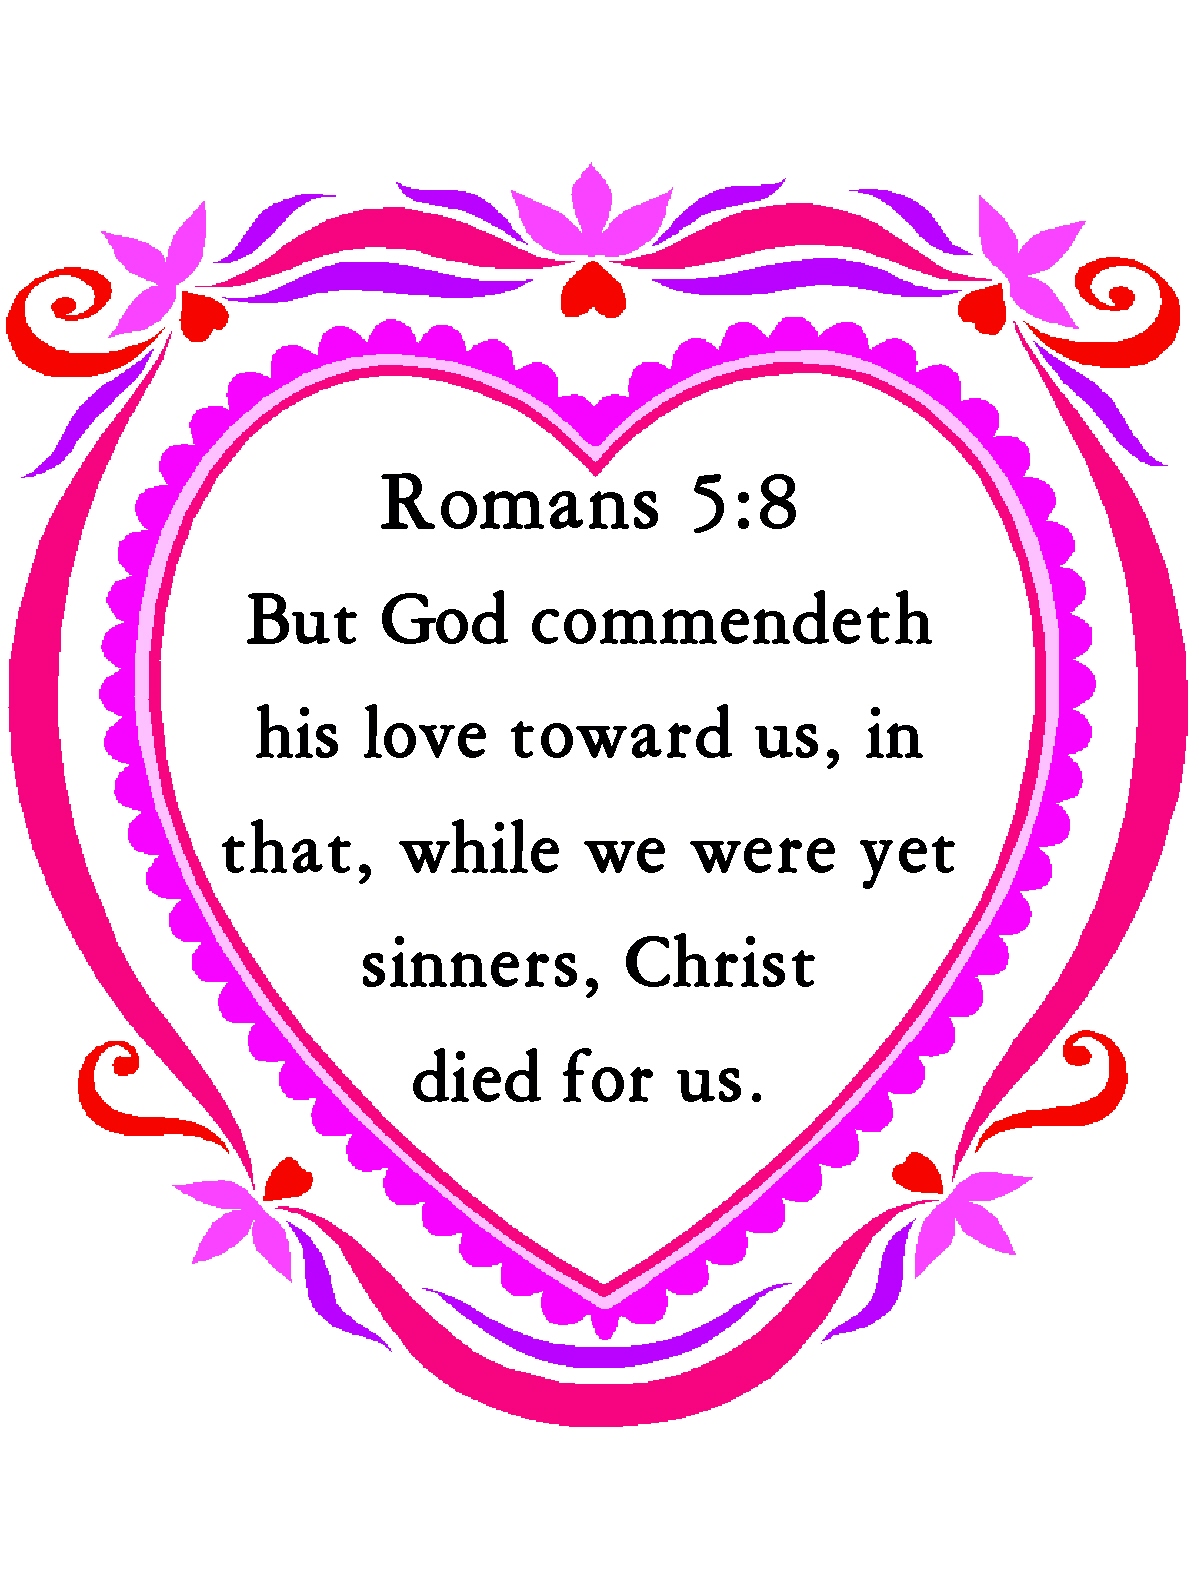 Christian Images In My Treasure Box: Romans 5:8 - Valentine Heart Stuff updated ...